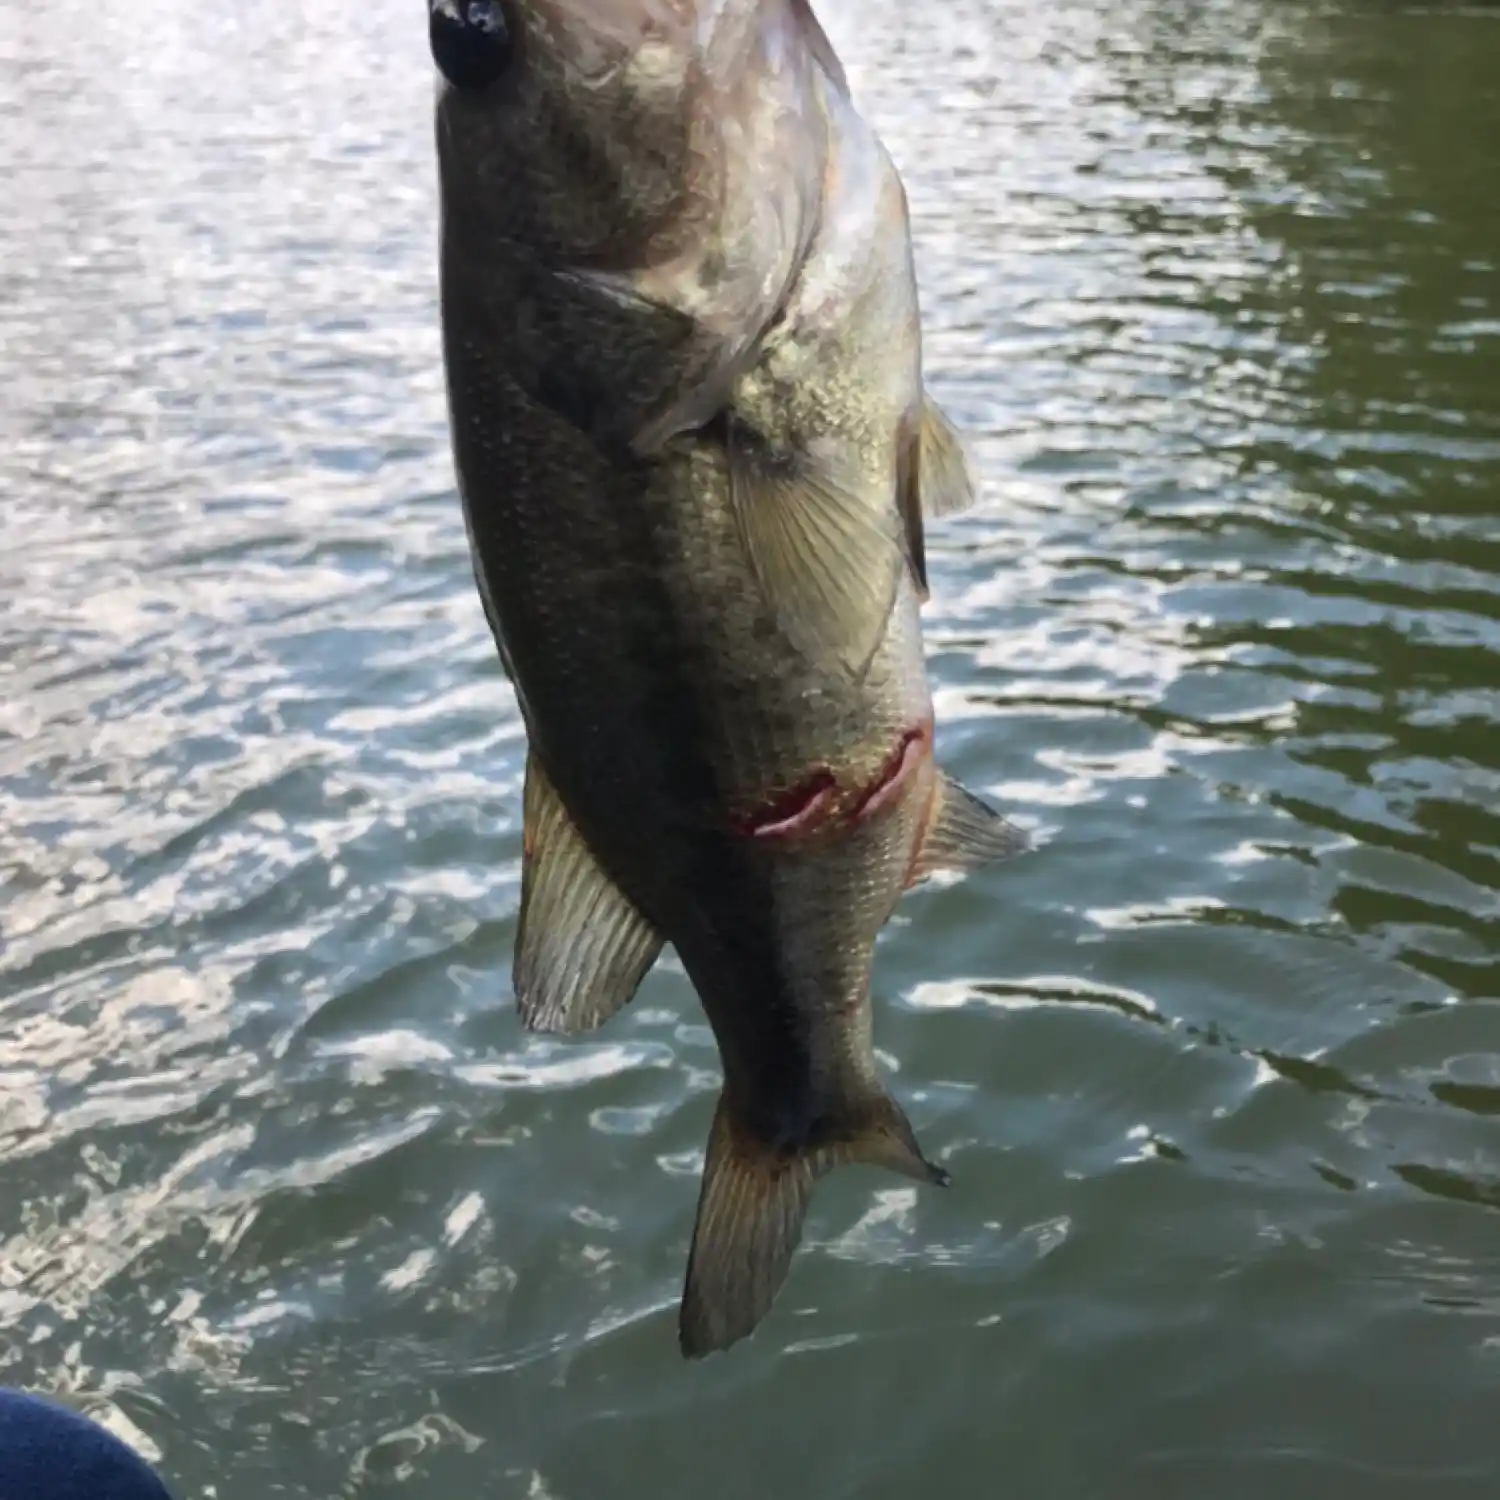 ᐅ Derby Pond fishing reports🎣• Dover, DE (United States) fishing